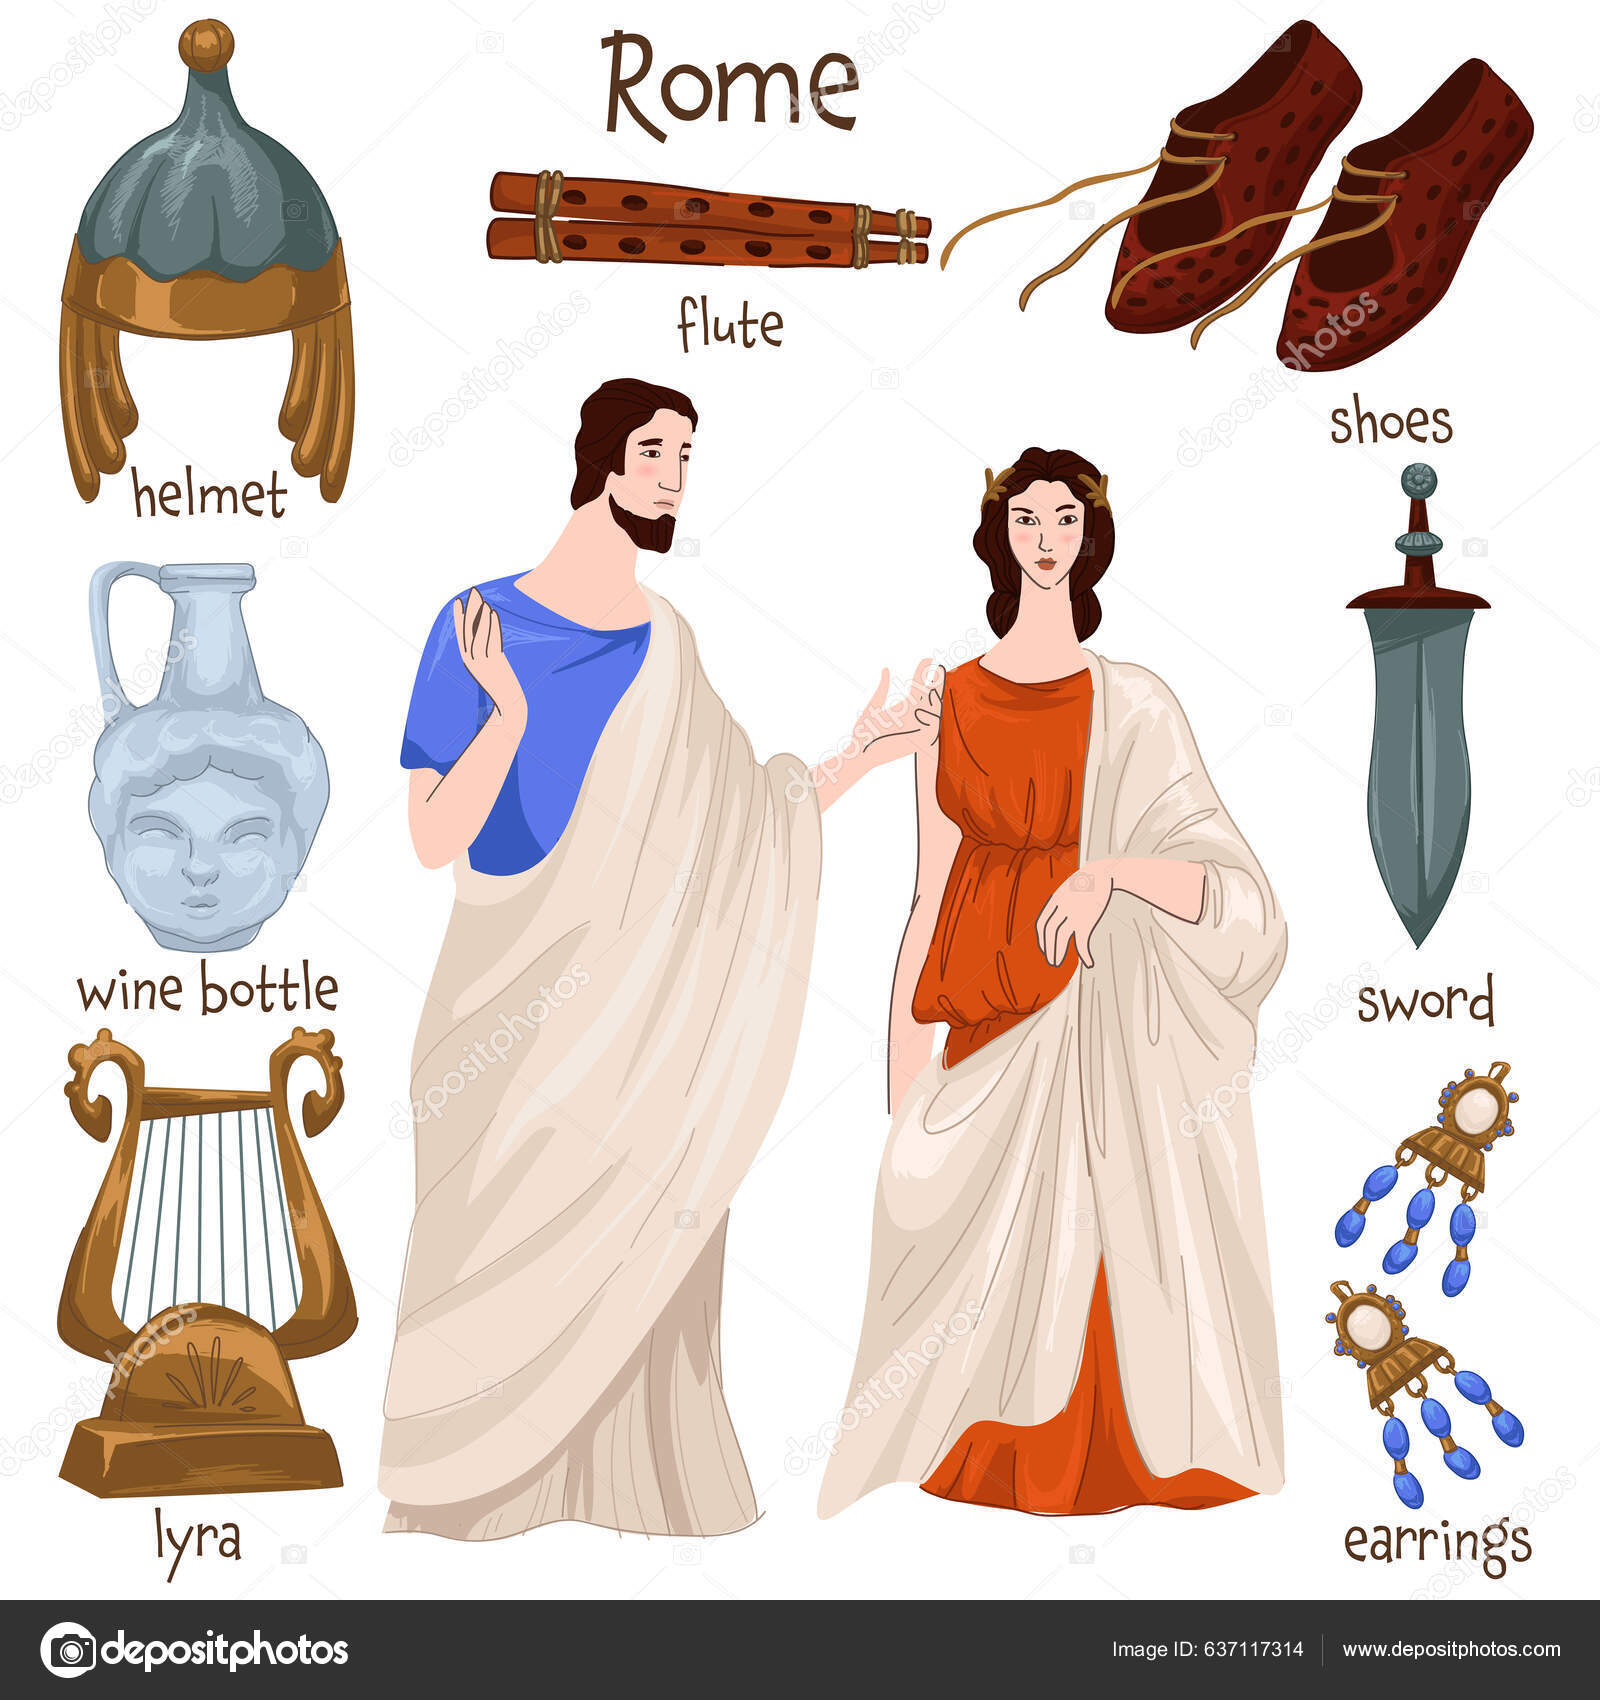 Roman Empire People Furniture Clothes Personal Belonging Isolated Man Woman  – stockvektor ©Sonulkaster 637117314